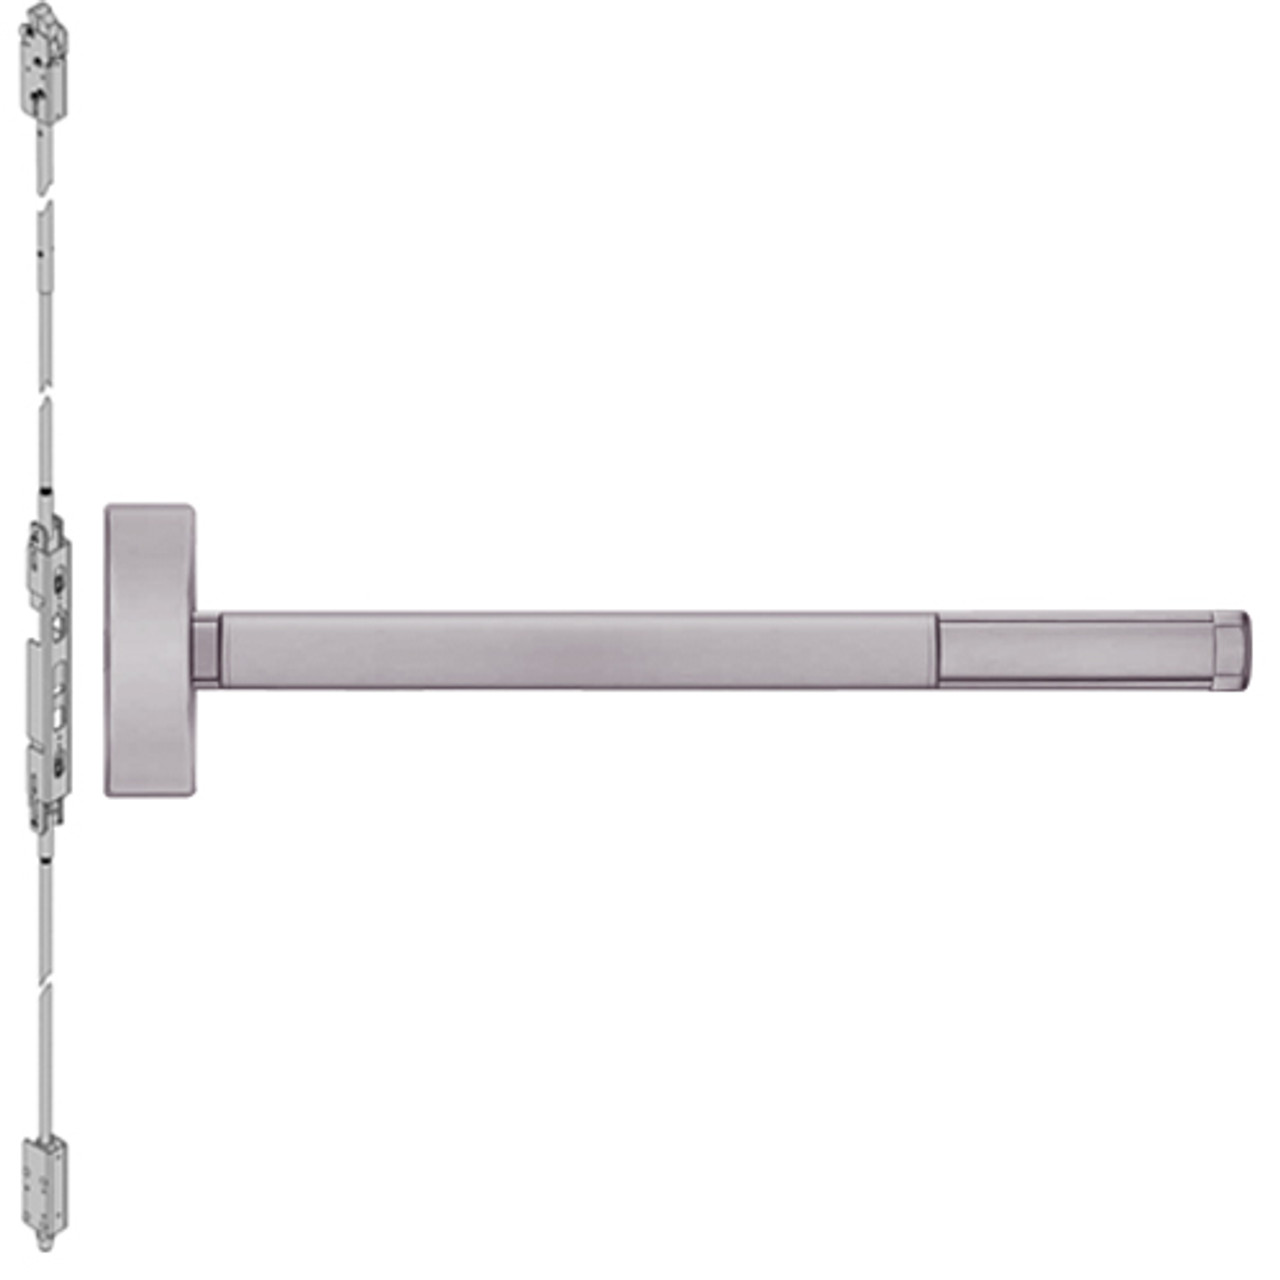 ELRFL2805LBR-630-36 PHI 2800 Series Fire Rated Concealed Vertical Rod Exit Device with Electric Latch Retraction Prepped for Key Controls Thumb Piece in Satin Stainless Steel Finish